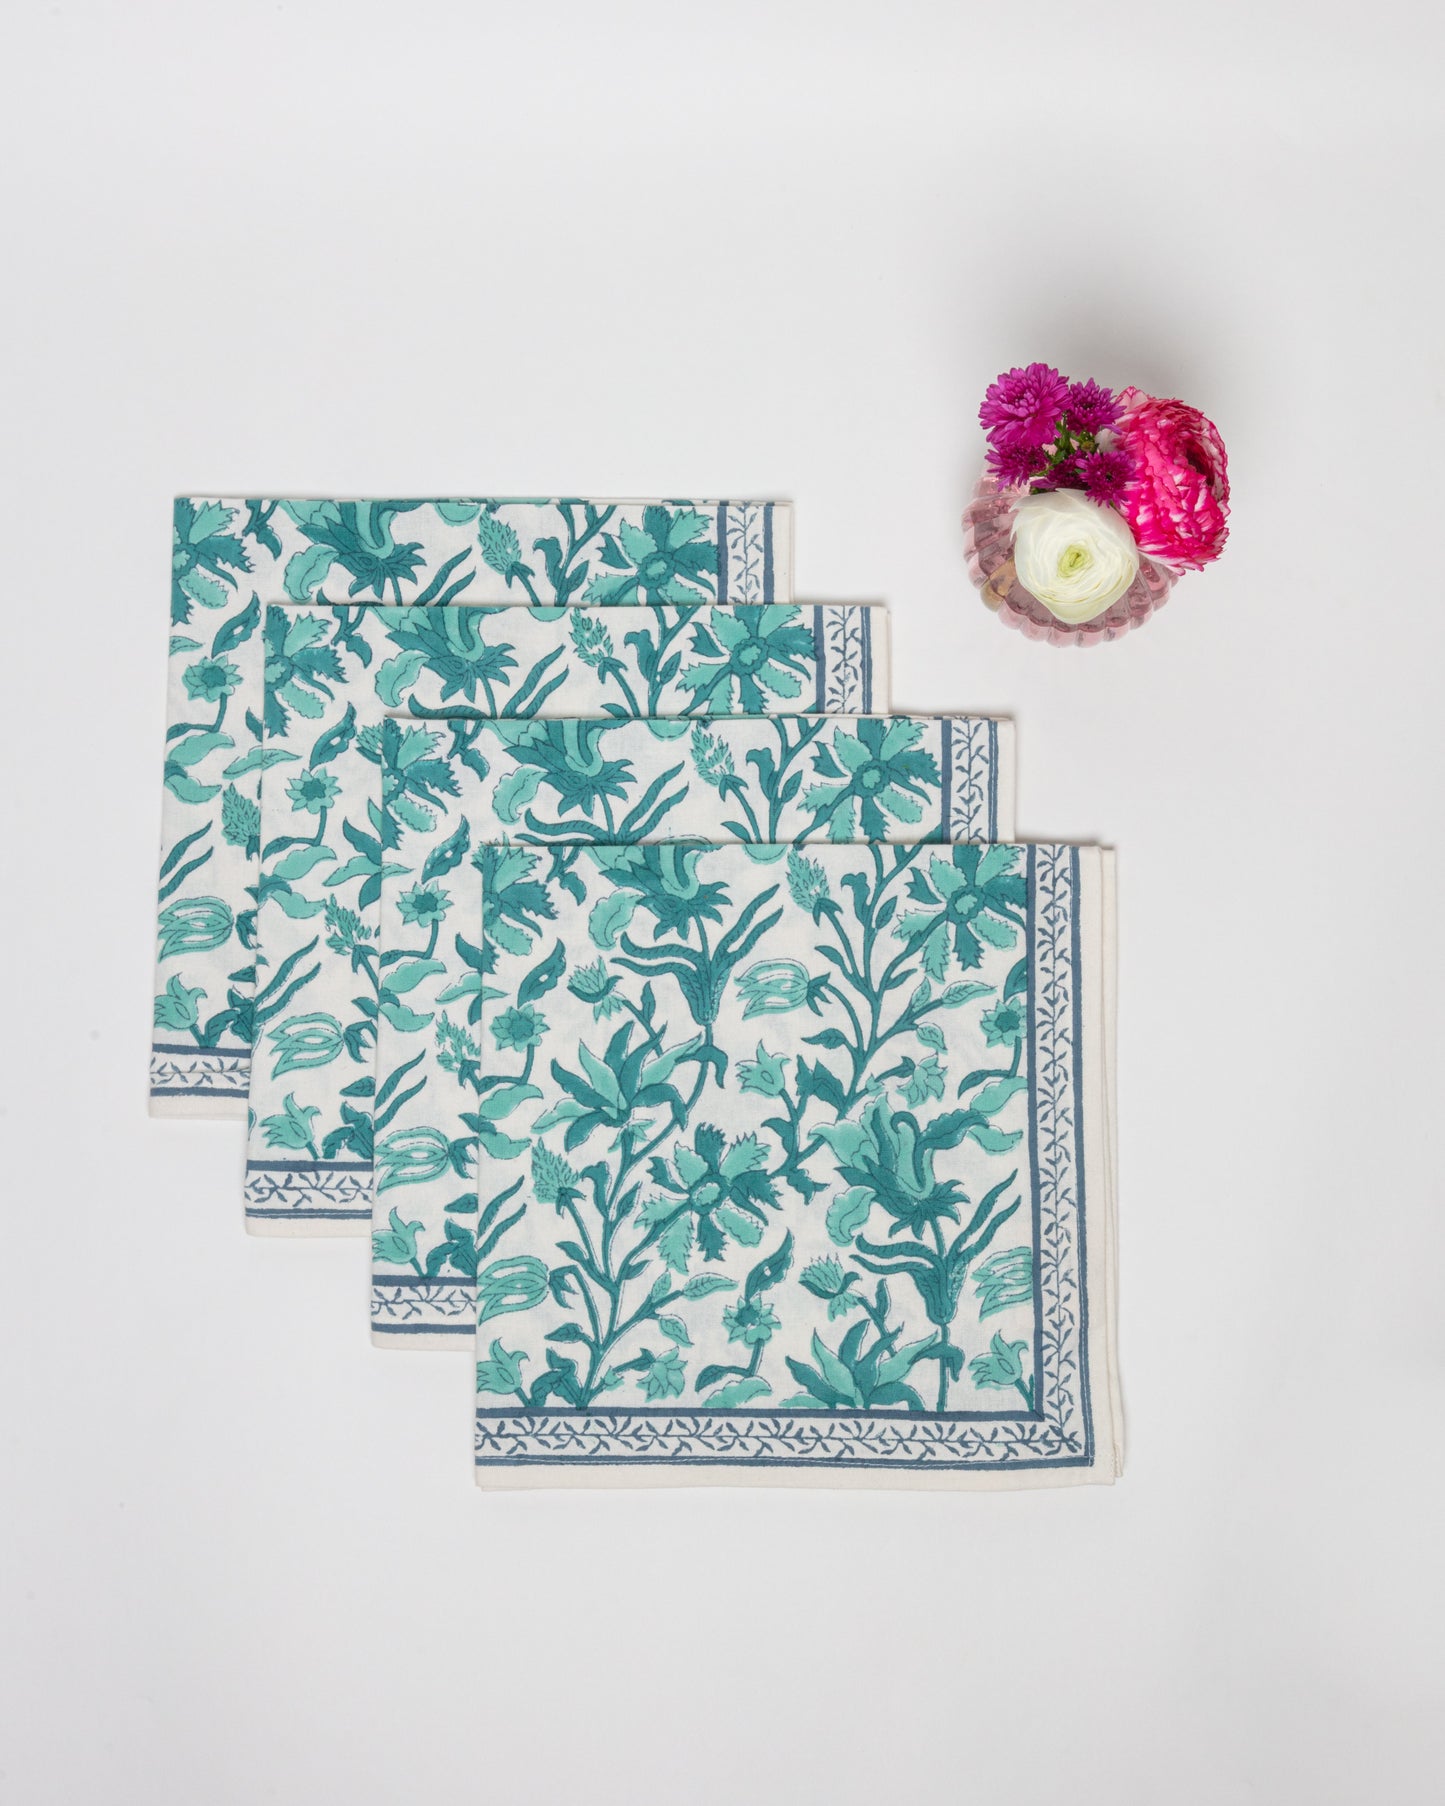 Set of 4 Block Printed Cotton Napkins in Turquoise Florals